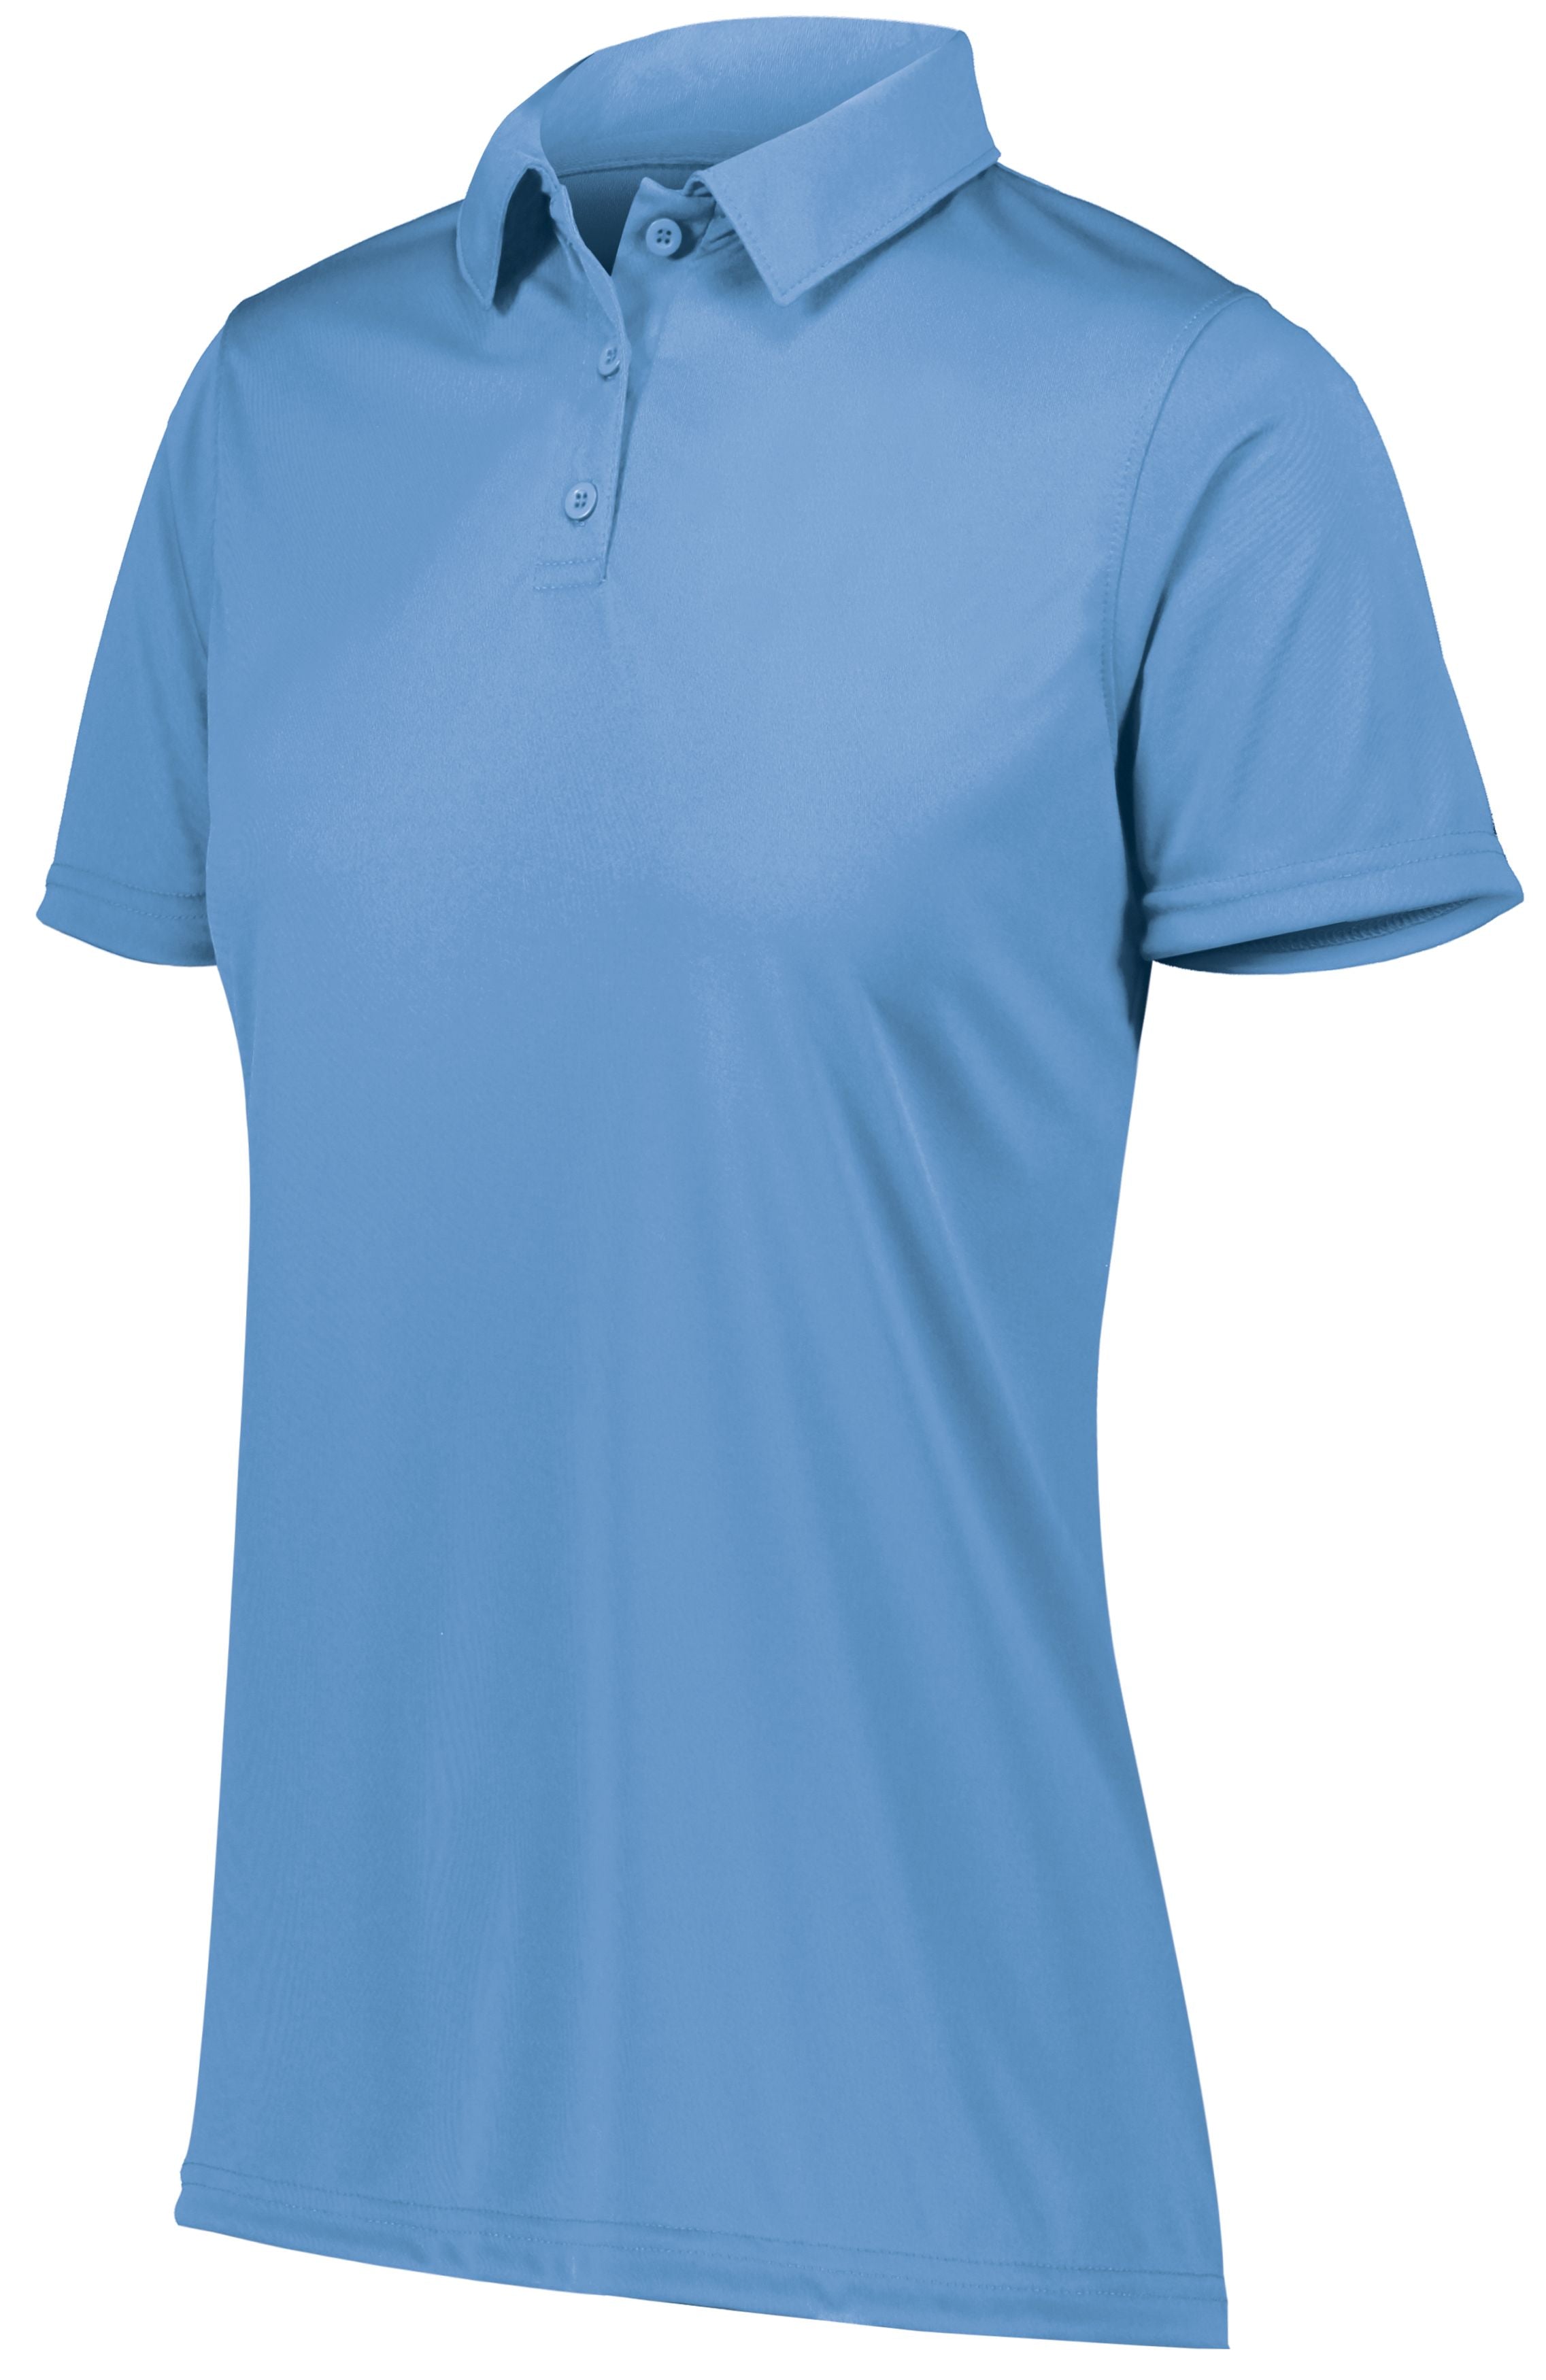 Augusta Sportswear Ladies Vital Polo in Columbia Blue  -Part of the Ladies, Ladies-Polo, Polos, Augusta-Products, Shirts product lines at KanaleyCreations.com